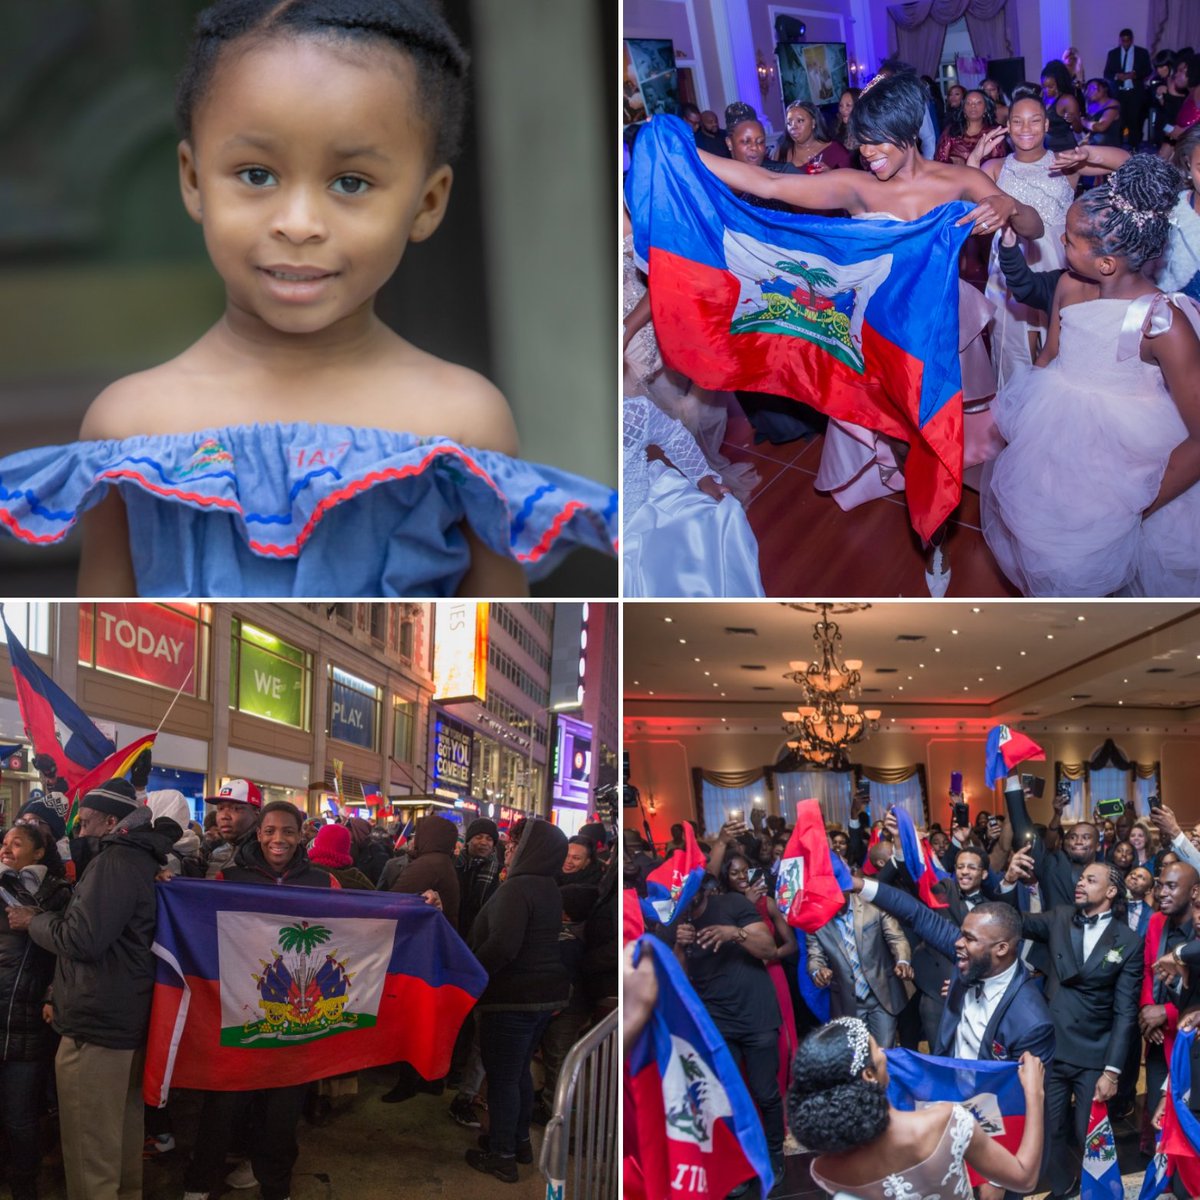 Celebrating the strength and resilience of a people that I am proud to be part of.
We have seen bad days and I pray that the upswing starts today.

#Haiti #haitianlife #haitianlove #haitianbeauty #haitianflagday #fètdrapo  #drapo #haitistrong #haitianphotographer #haitianheritage